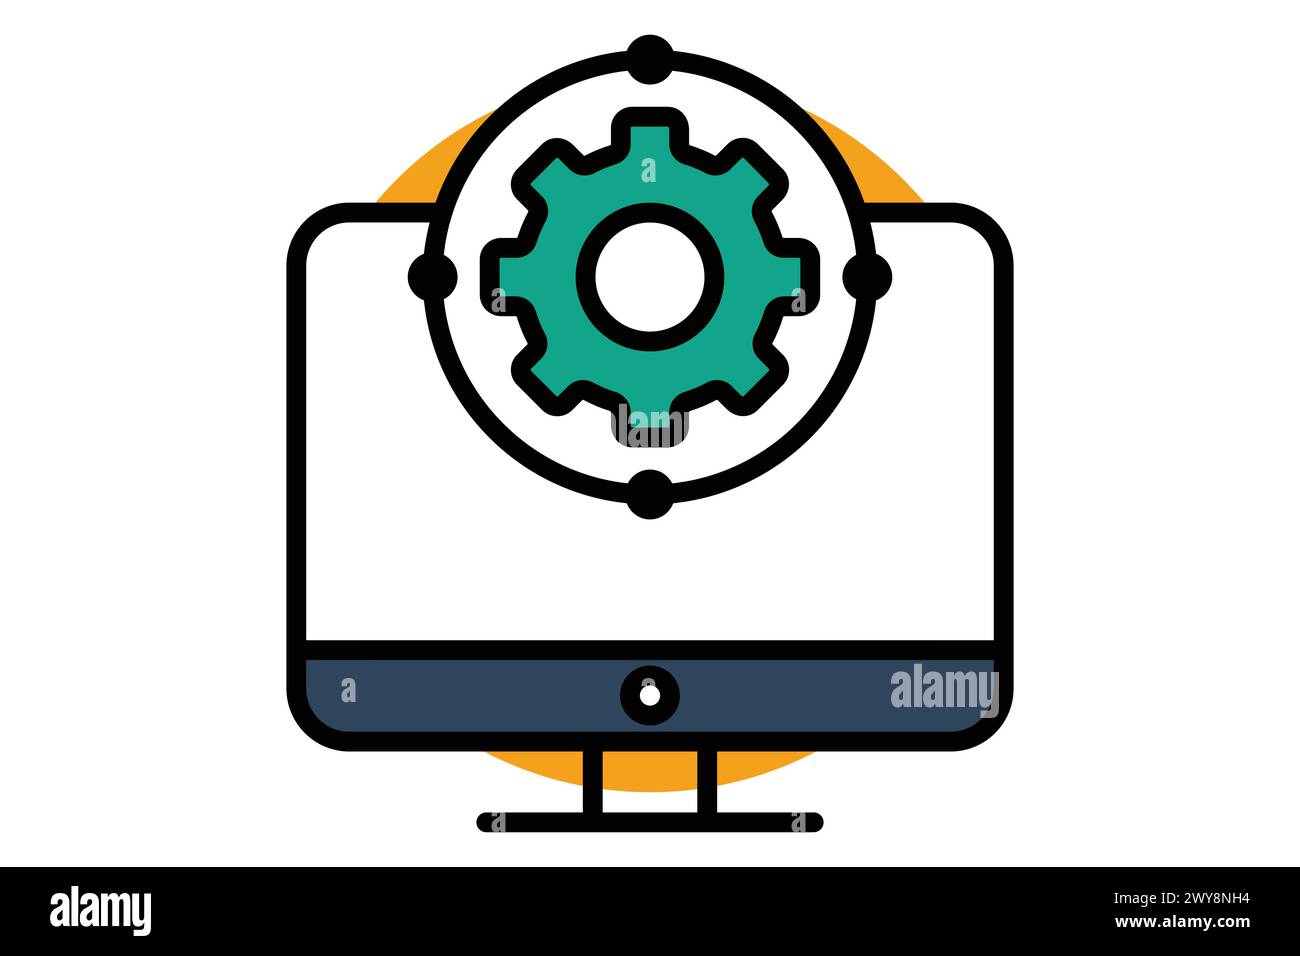 development icon. monitor with gear. icon related to action plan, business. flat line icon style. business element illustration Stock Vector